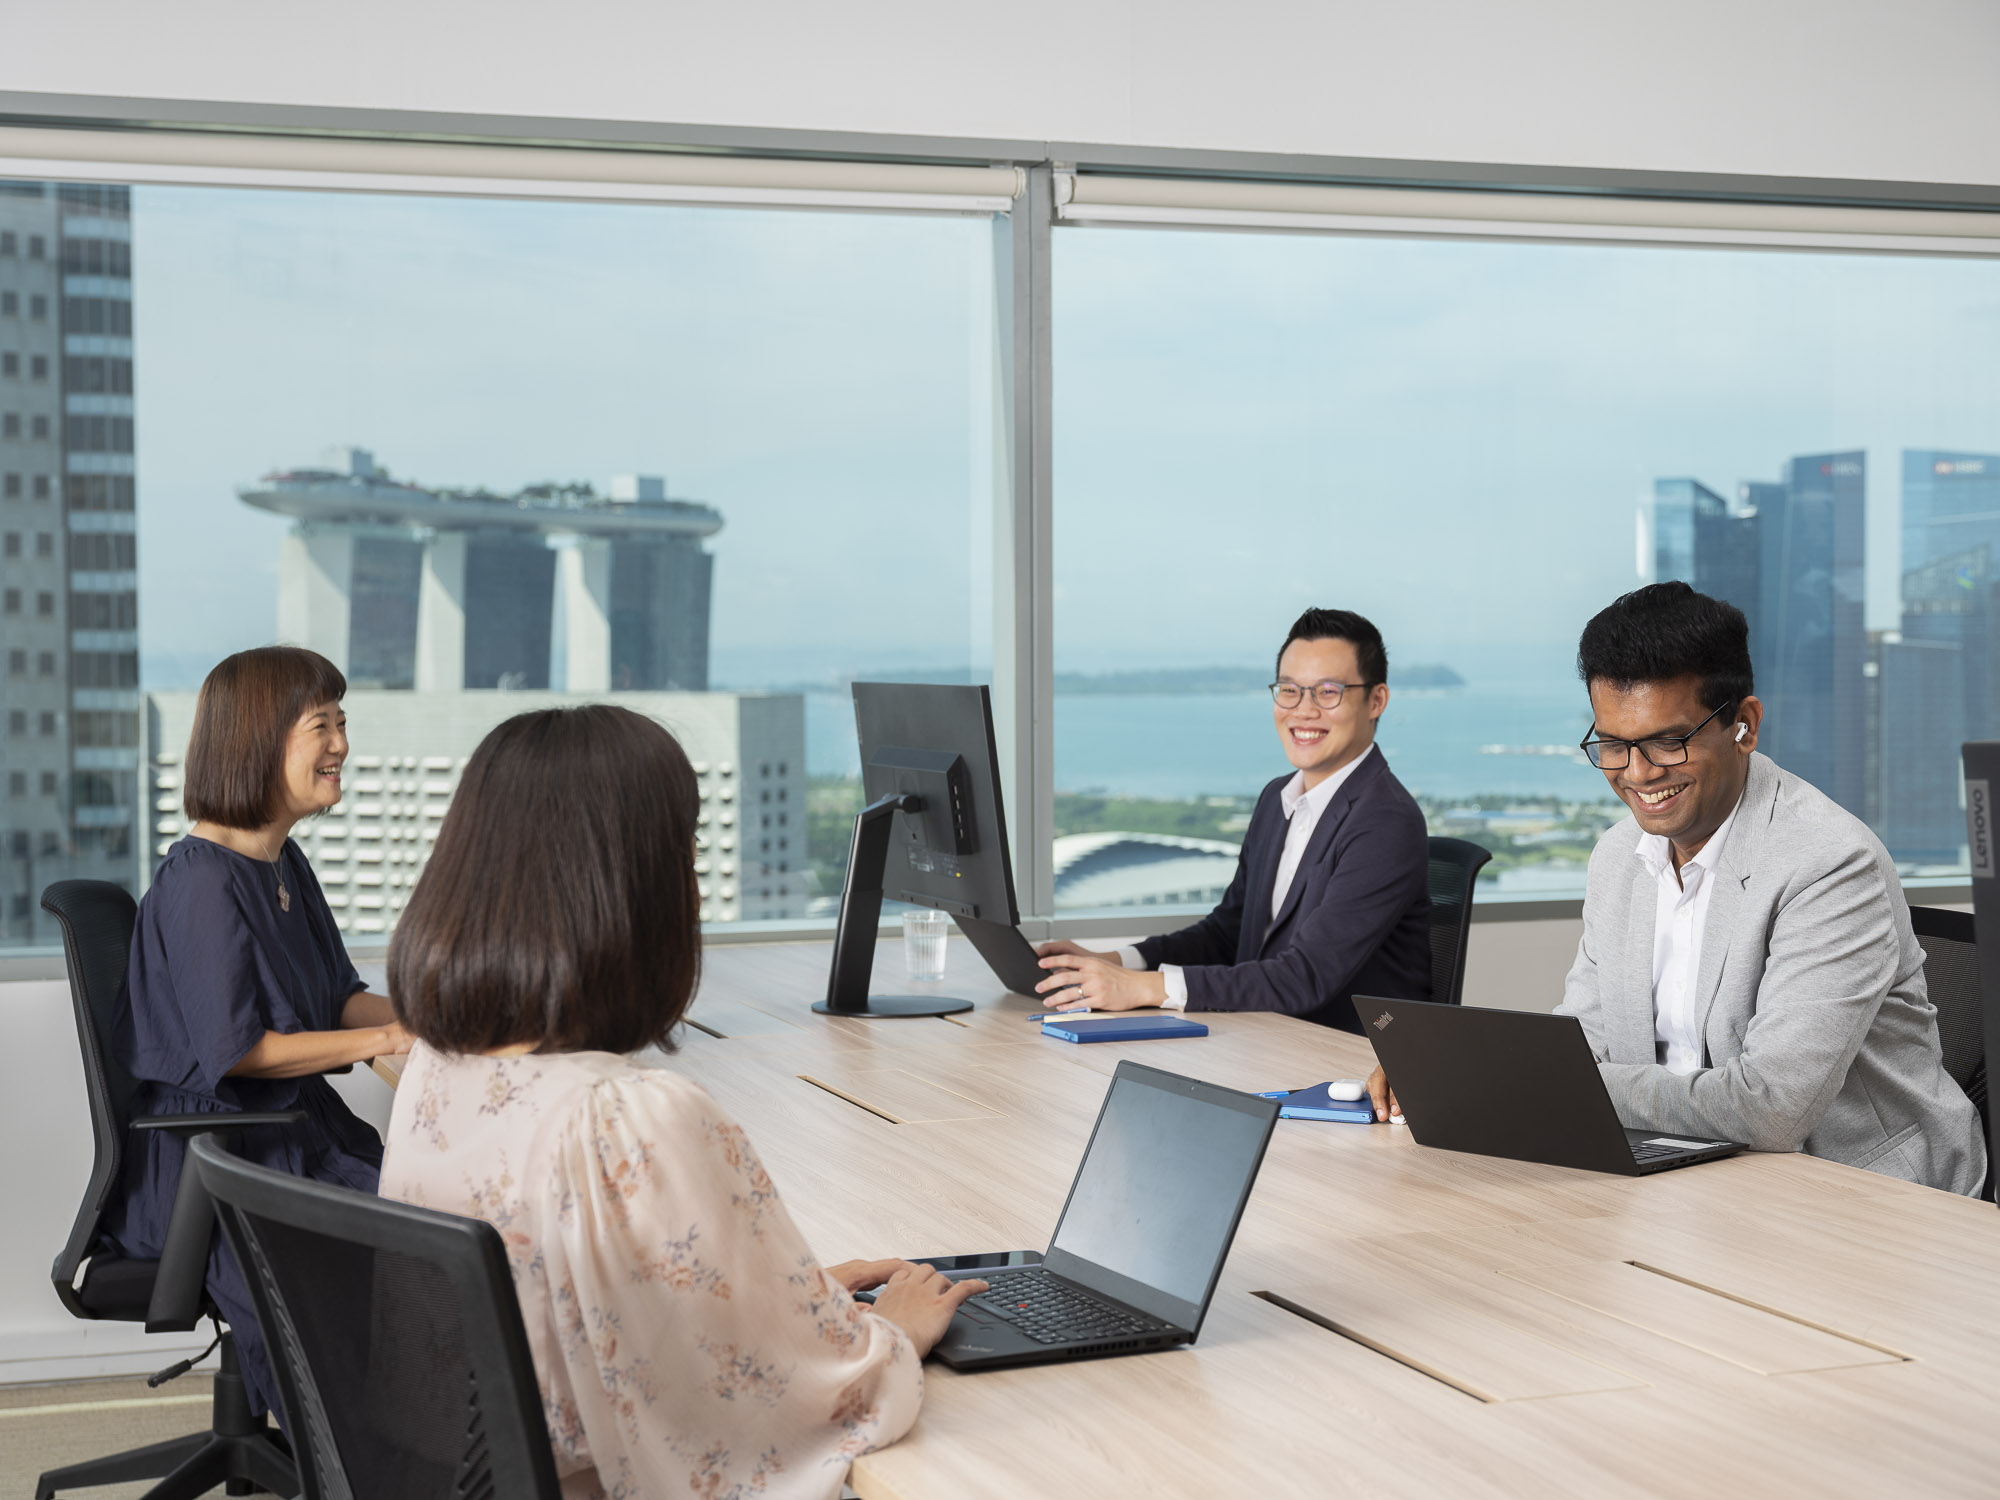 Commercial photography studio stock office image Singapore corporate 2